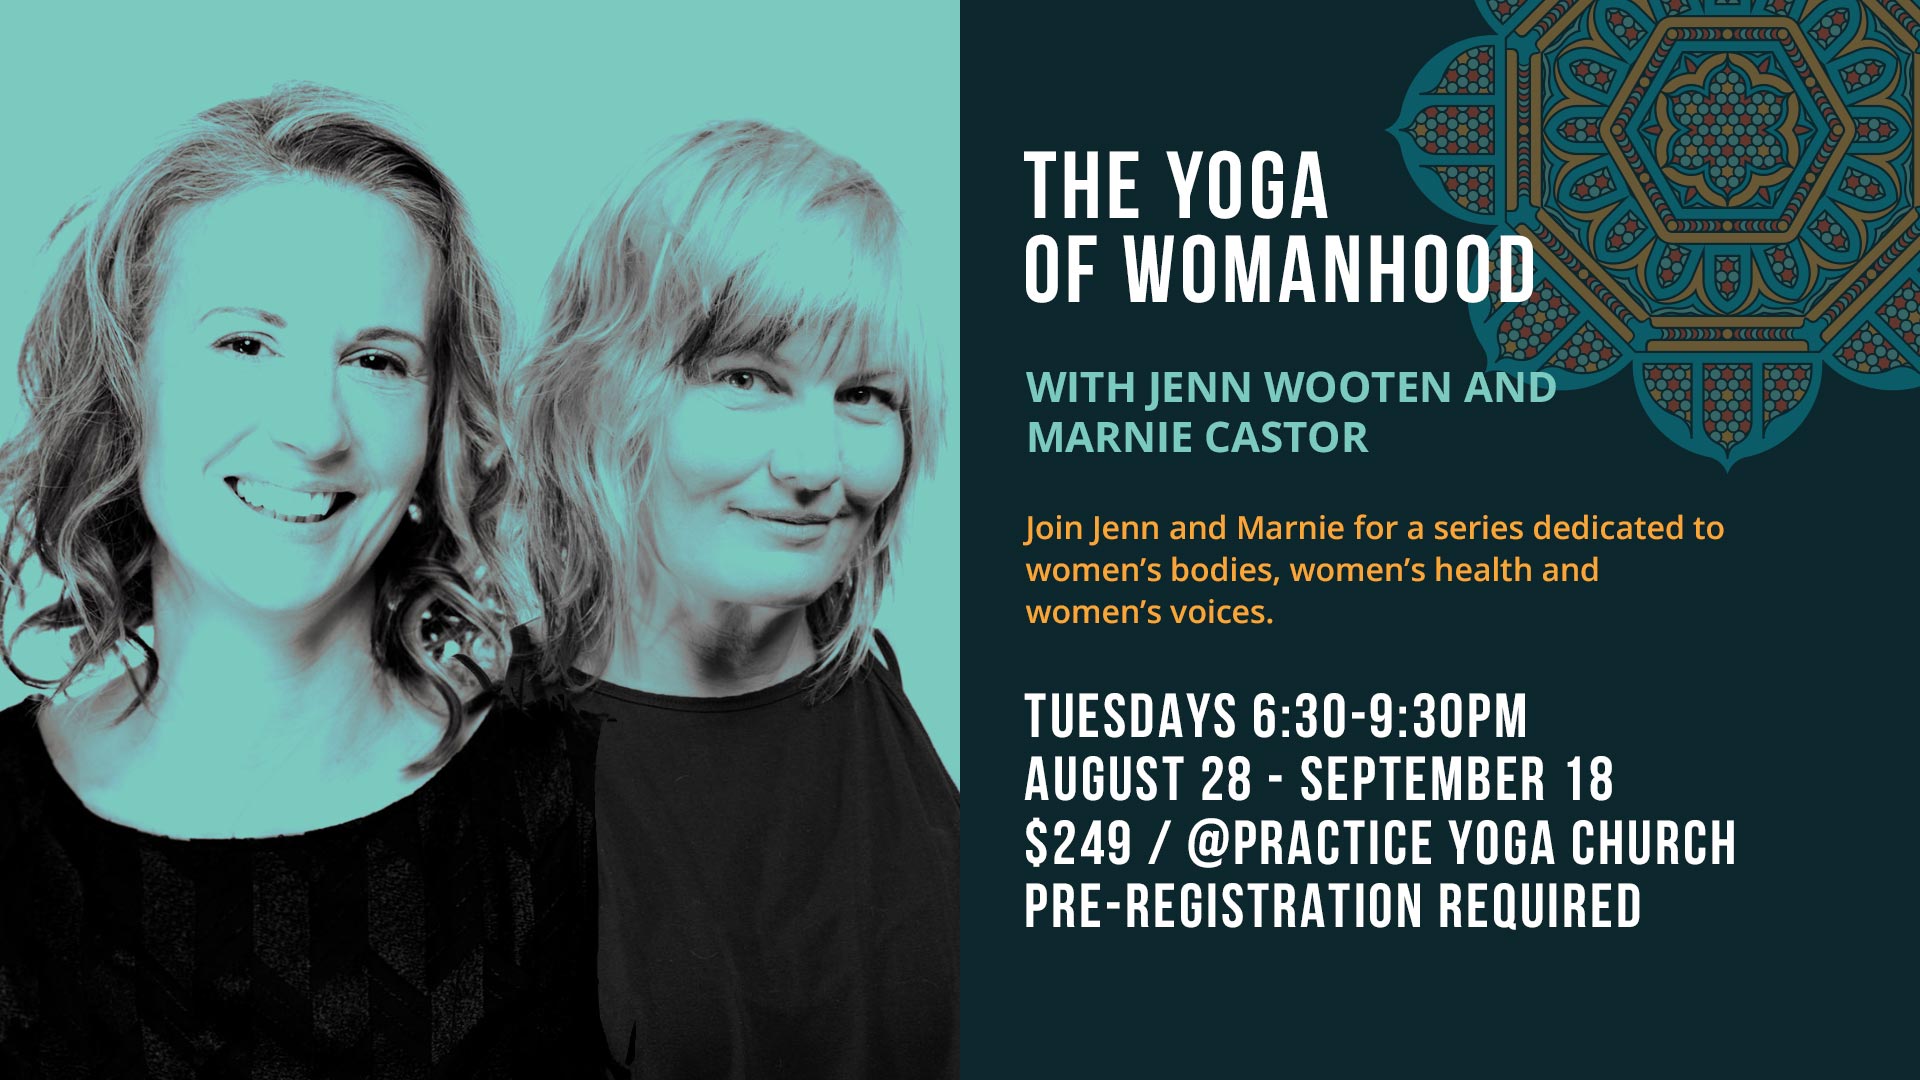 The Yoga of Womanhood with Marnie Castor and Jenn Wooten